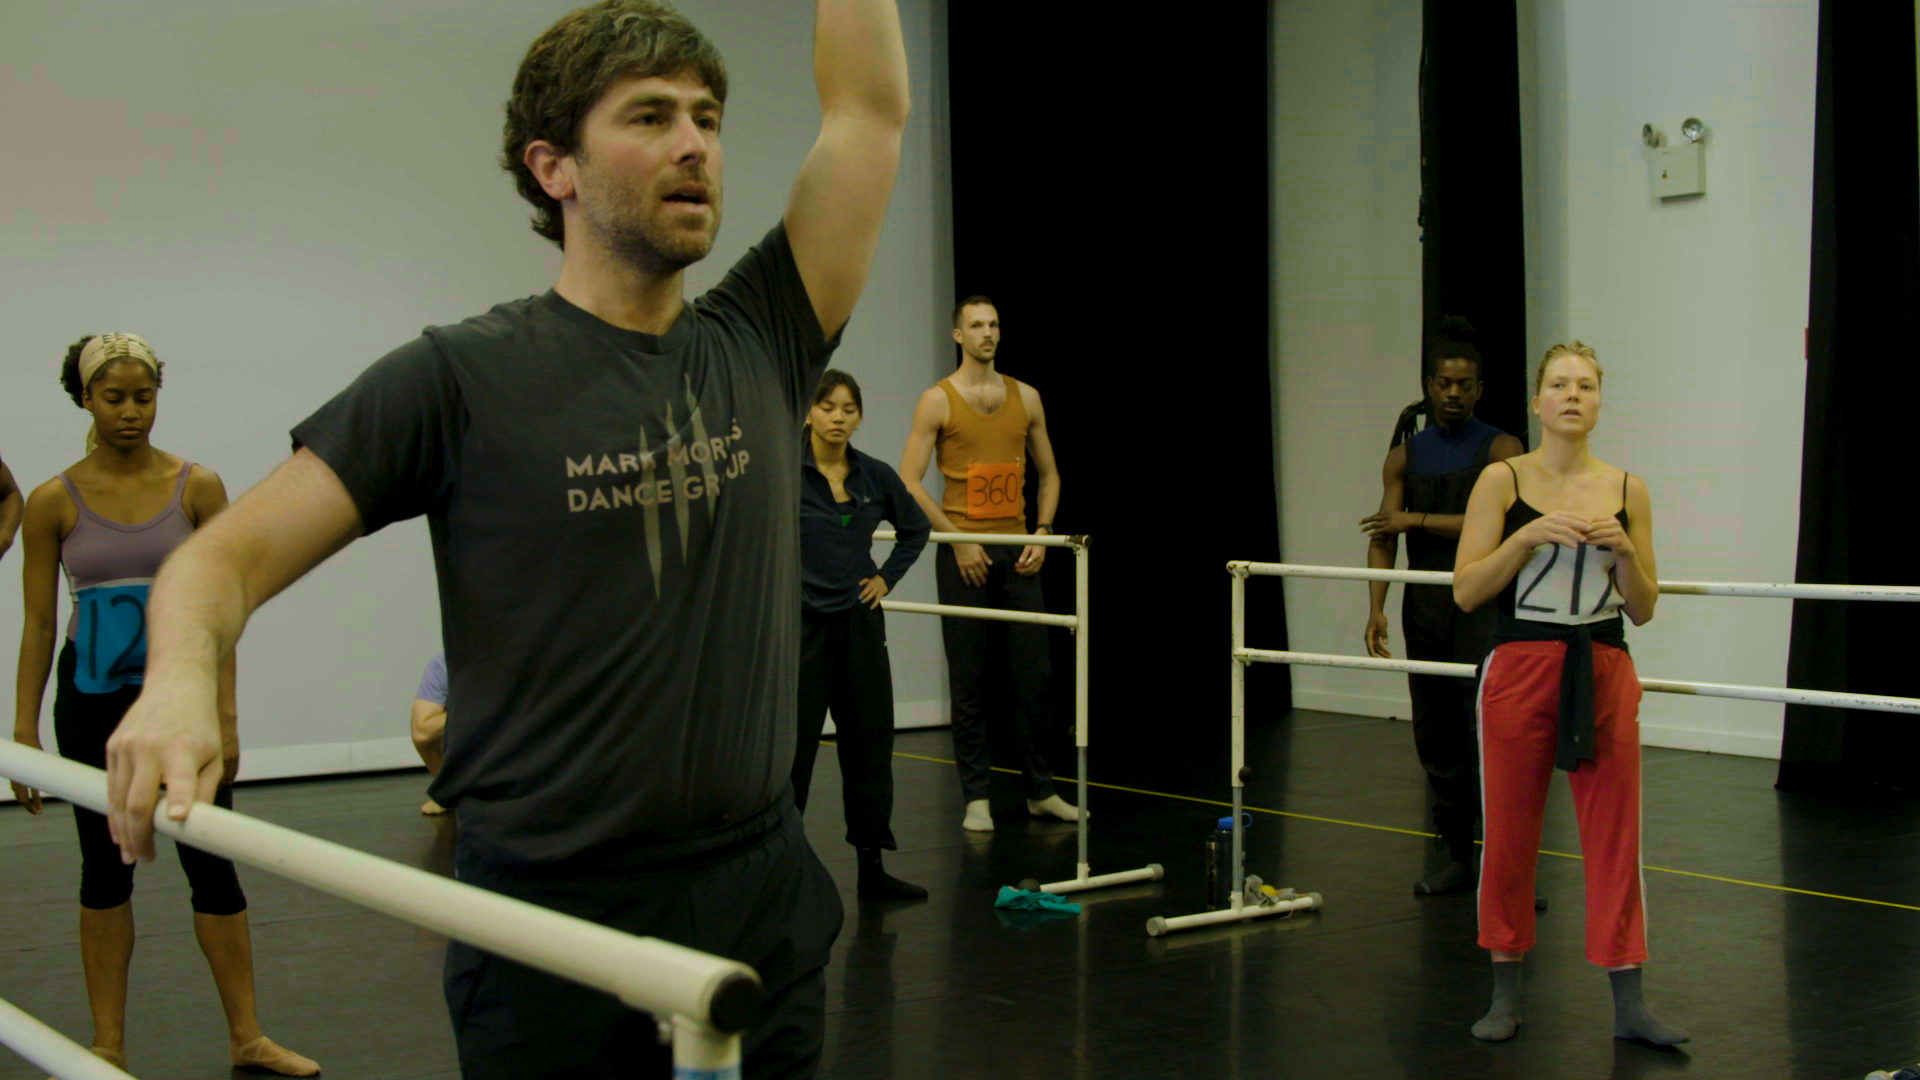 Several dancers with numbers pinned to their rehearsal clothing stand in a dance studio, watching Black—wearing a Mark Morris Dance Group t-shirt—demonstrate a combination. Black's right hand rests on a barre and his left is raised above his head.